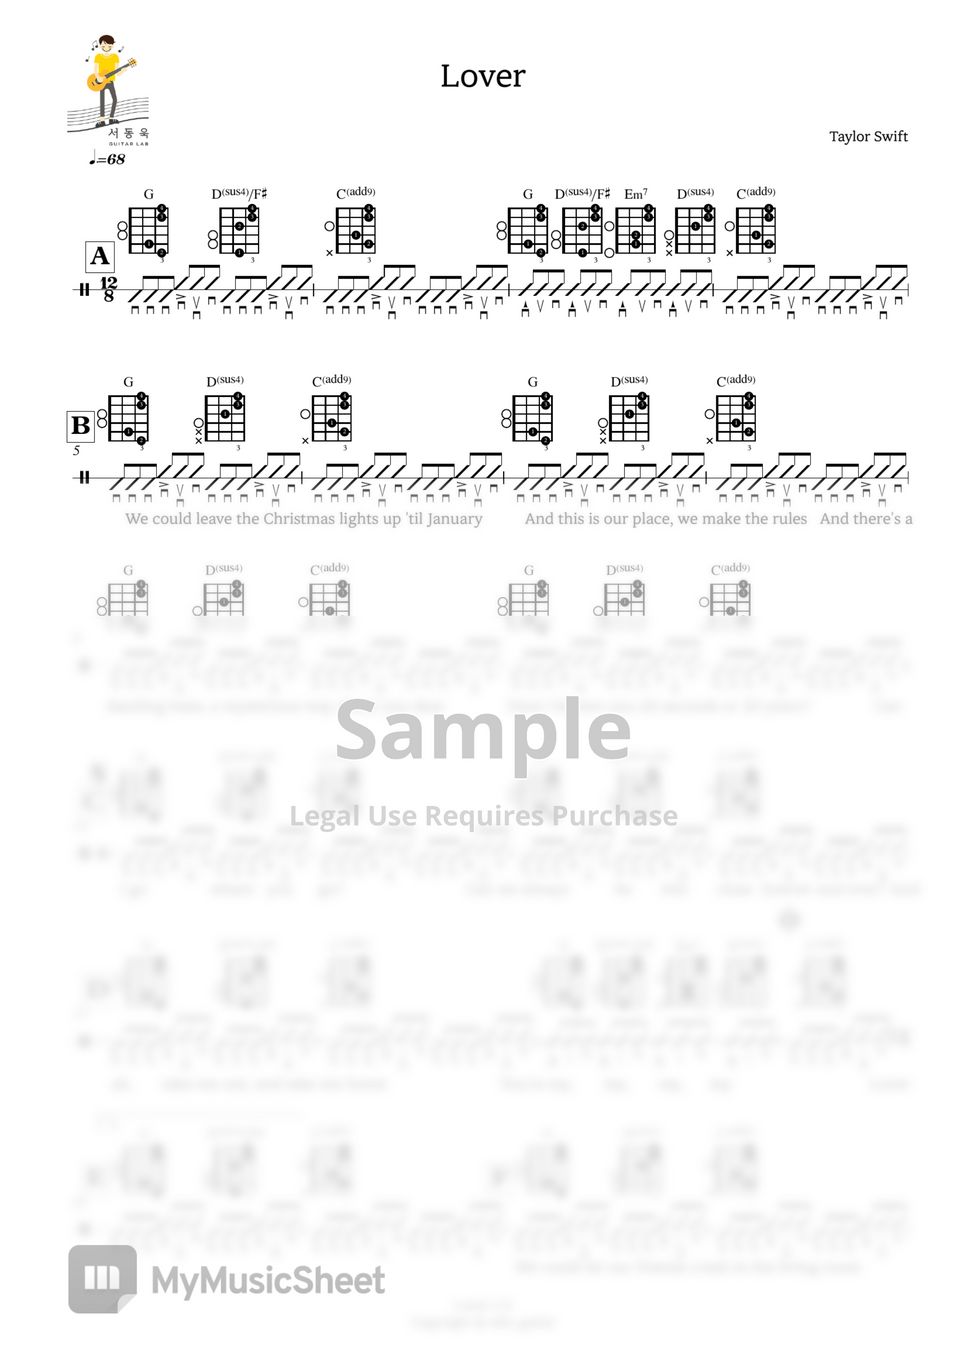 Taylor Swift - Lover (Guitar TAB) Sheets by 서동욱